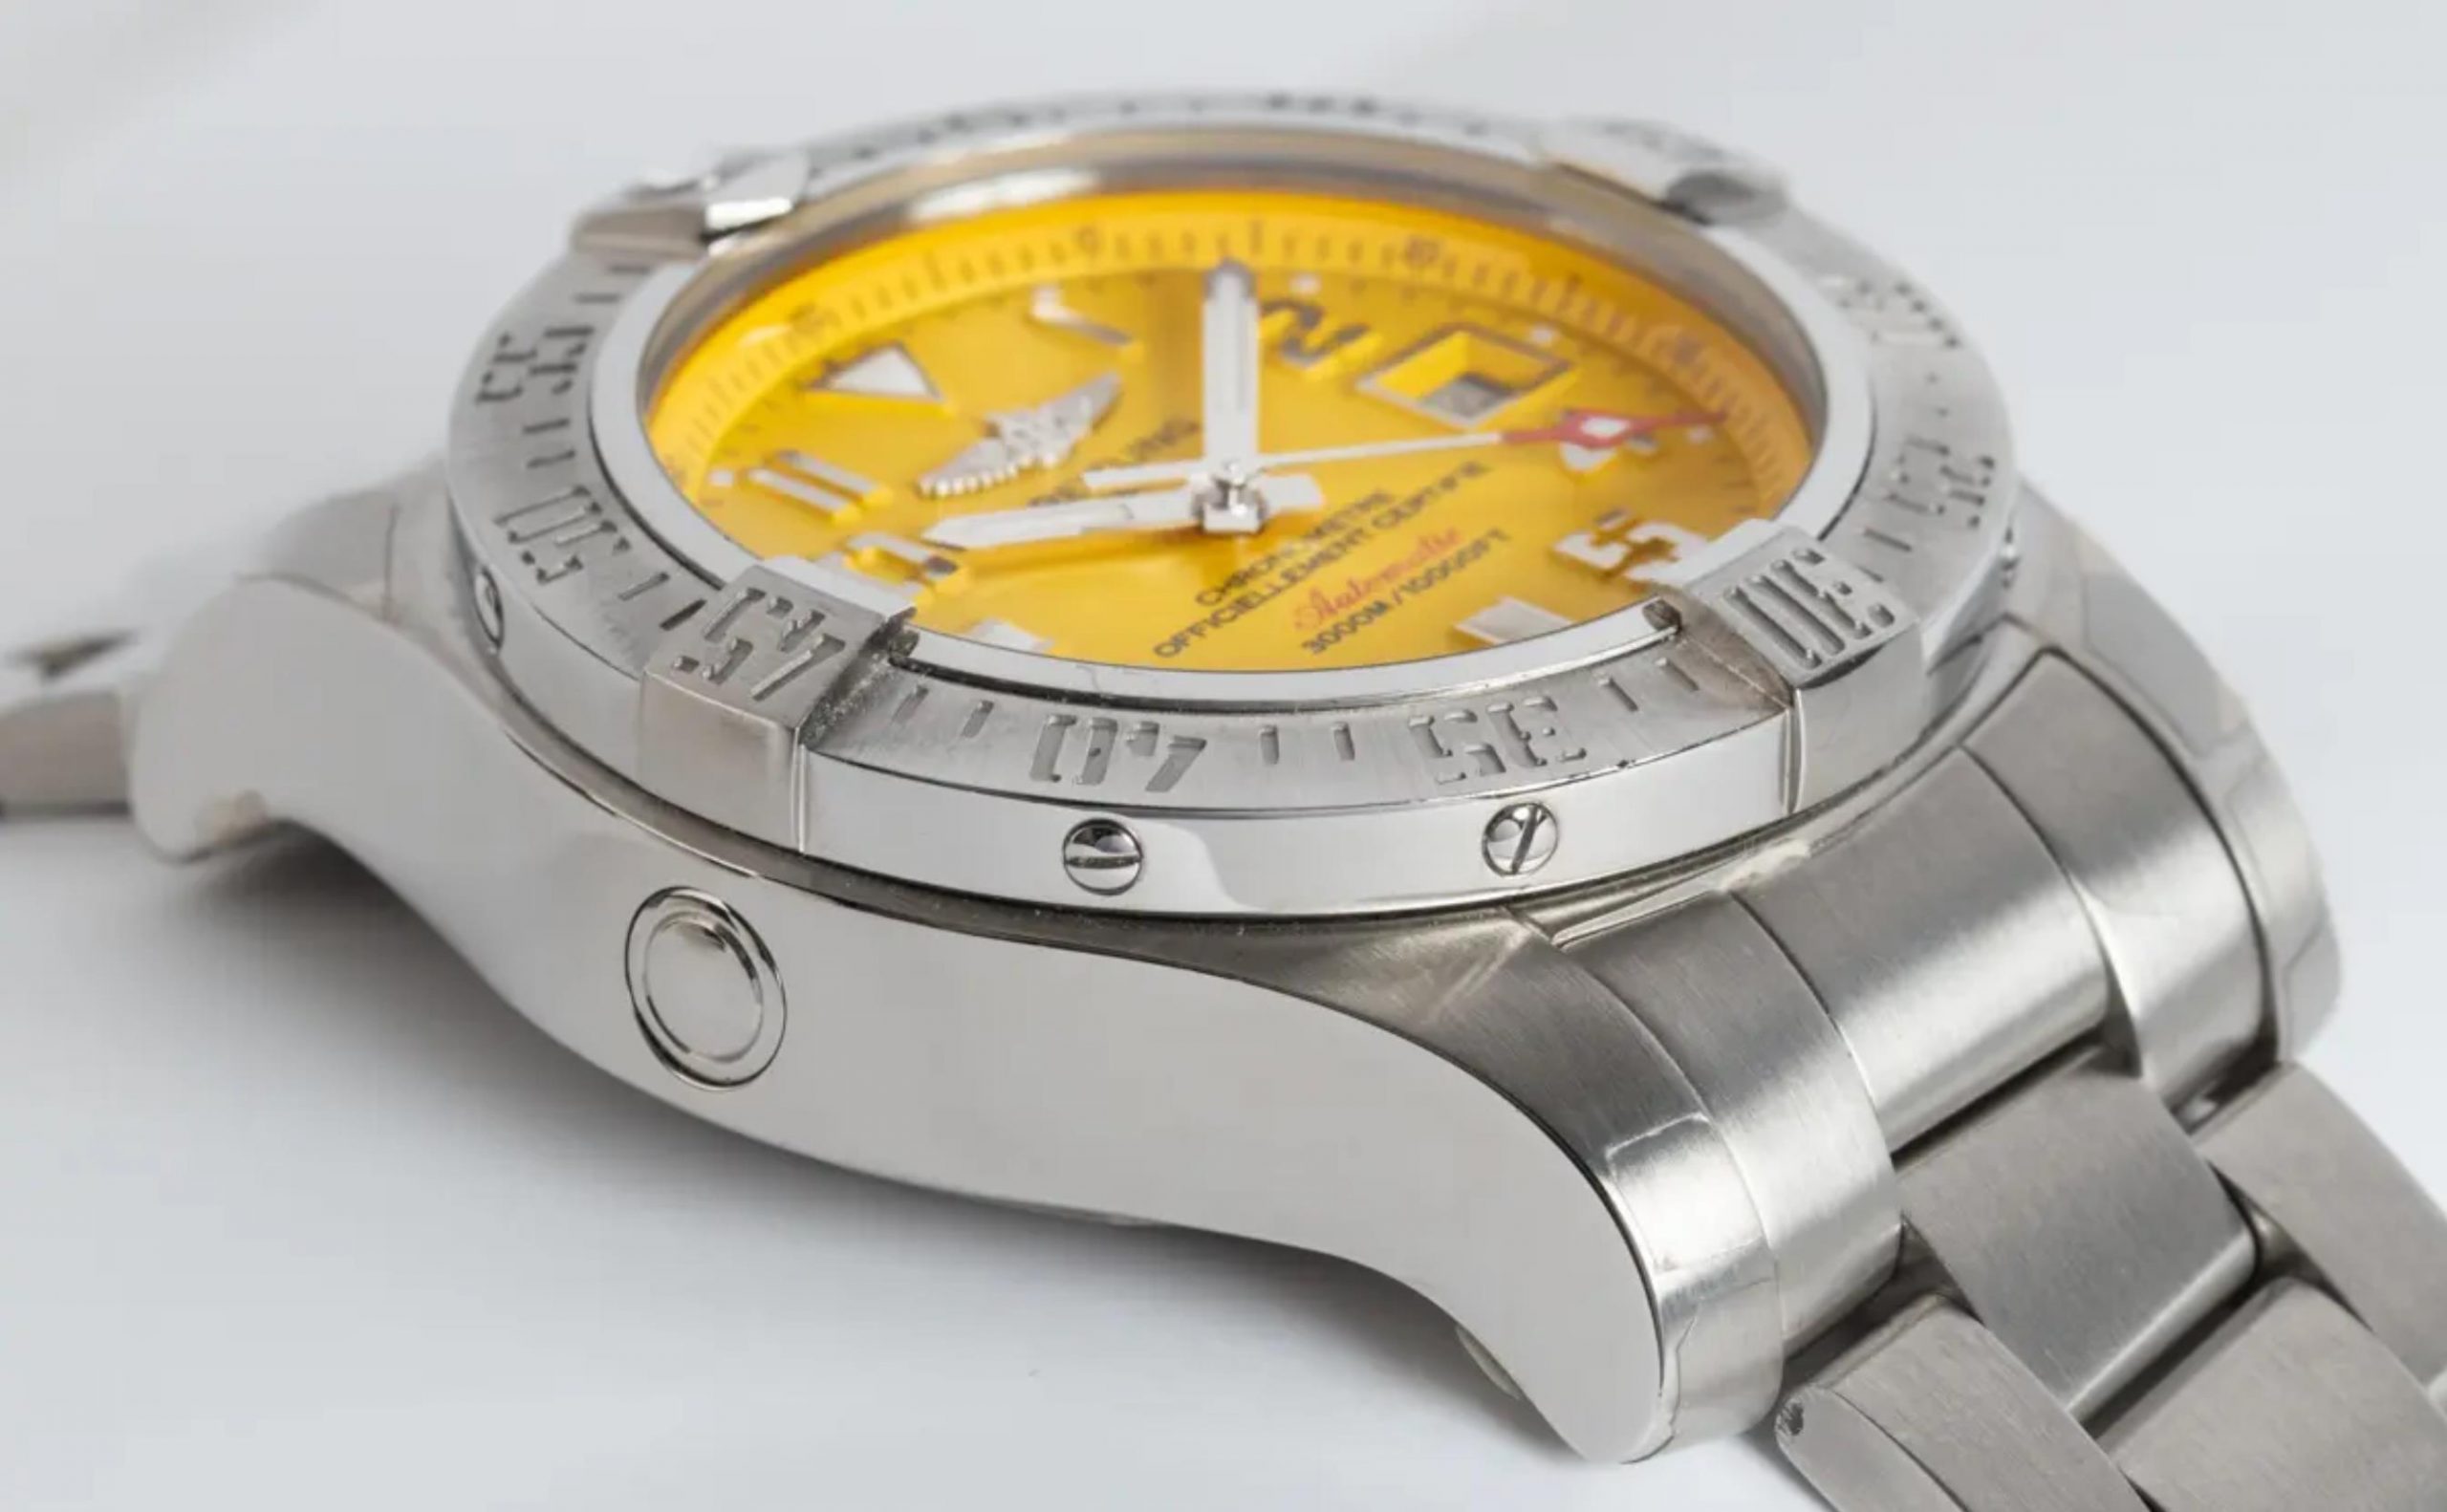 The 45mm replica watch is made from stainless steel.